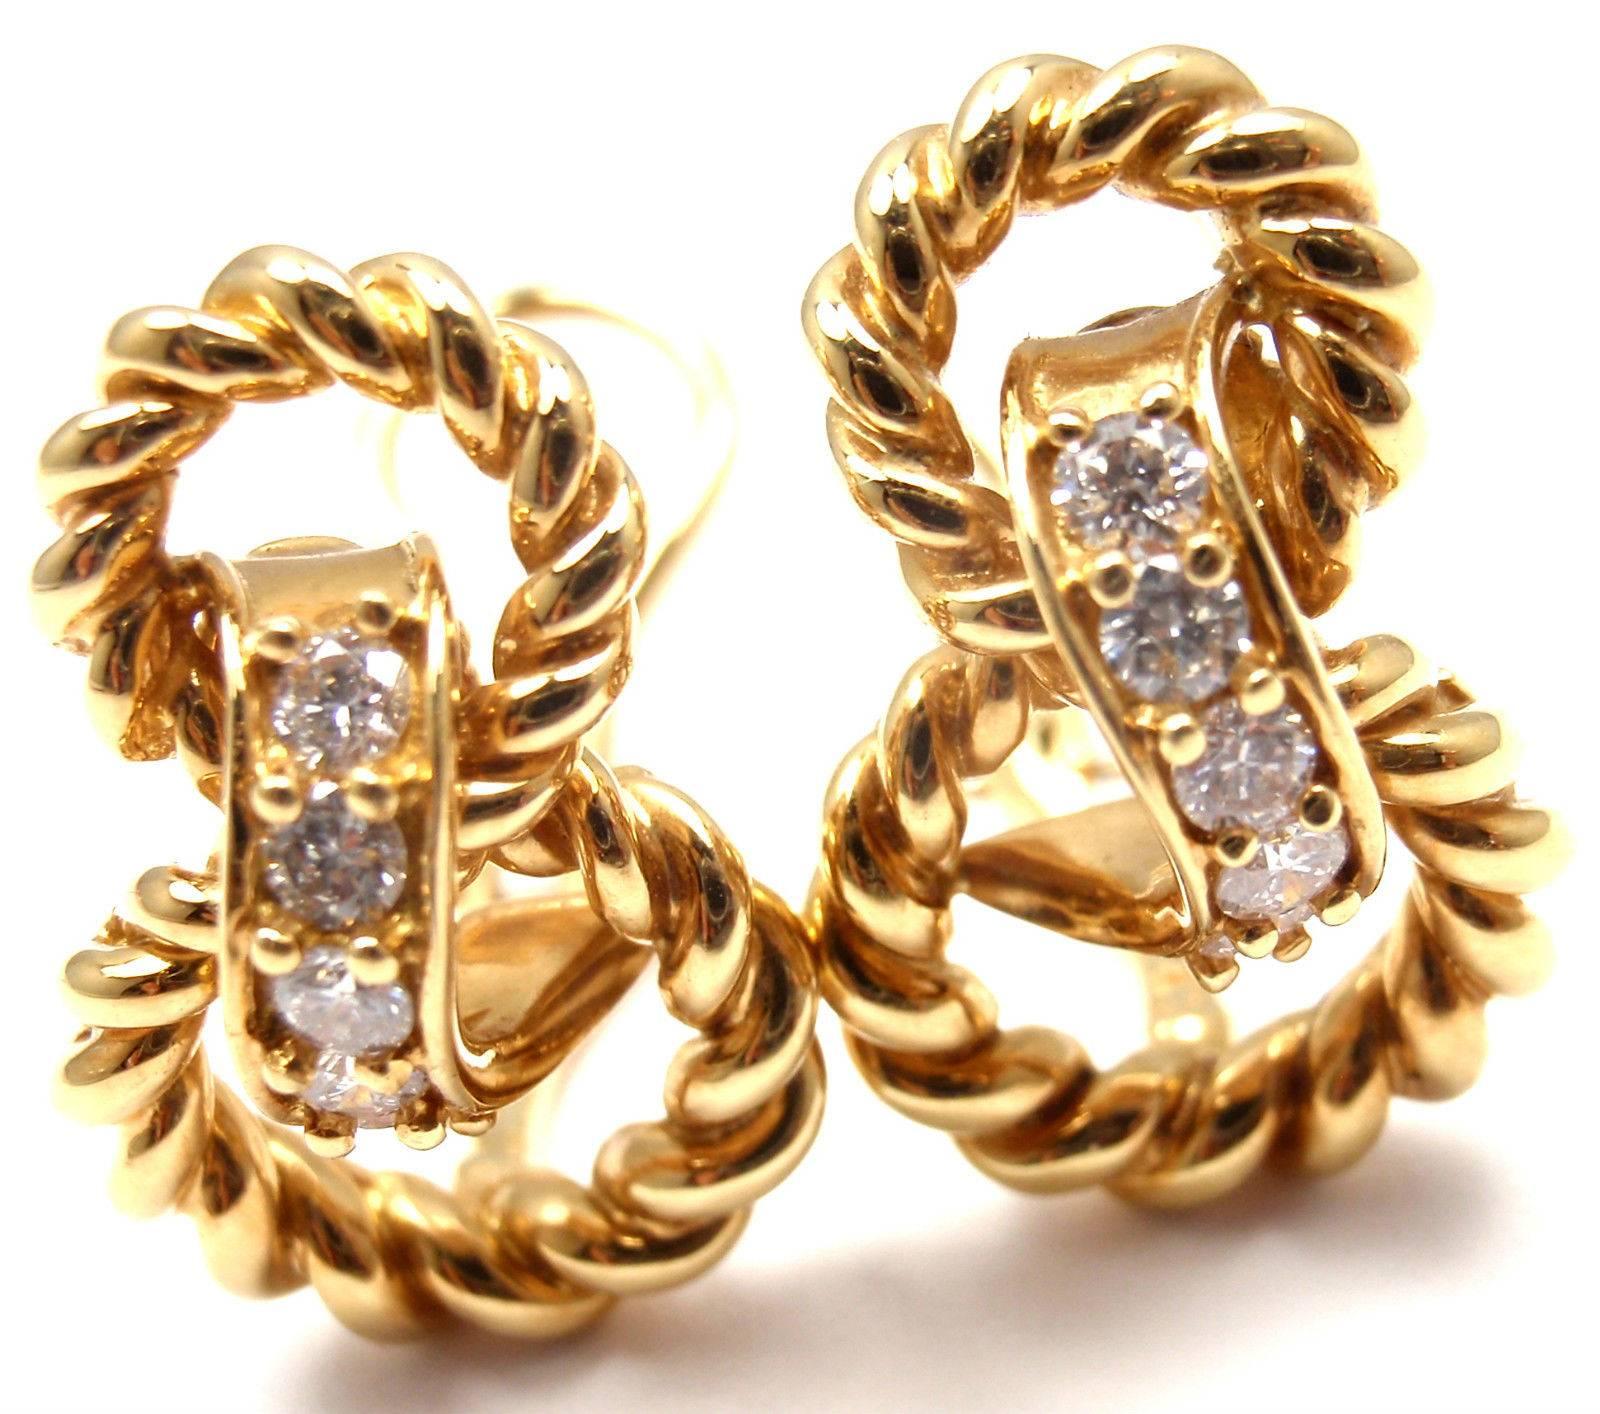 18k Yellow Gold Diamond Earrings by Tiffany & Co.
With 10 round brilliant cut diamonds VS1 clarity, G color total weight approx. .30ct

These earrings are made for non pierced ears, but they could be easily converted.

Details:
Weight: 10.4